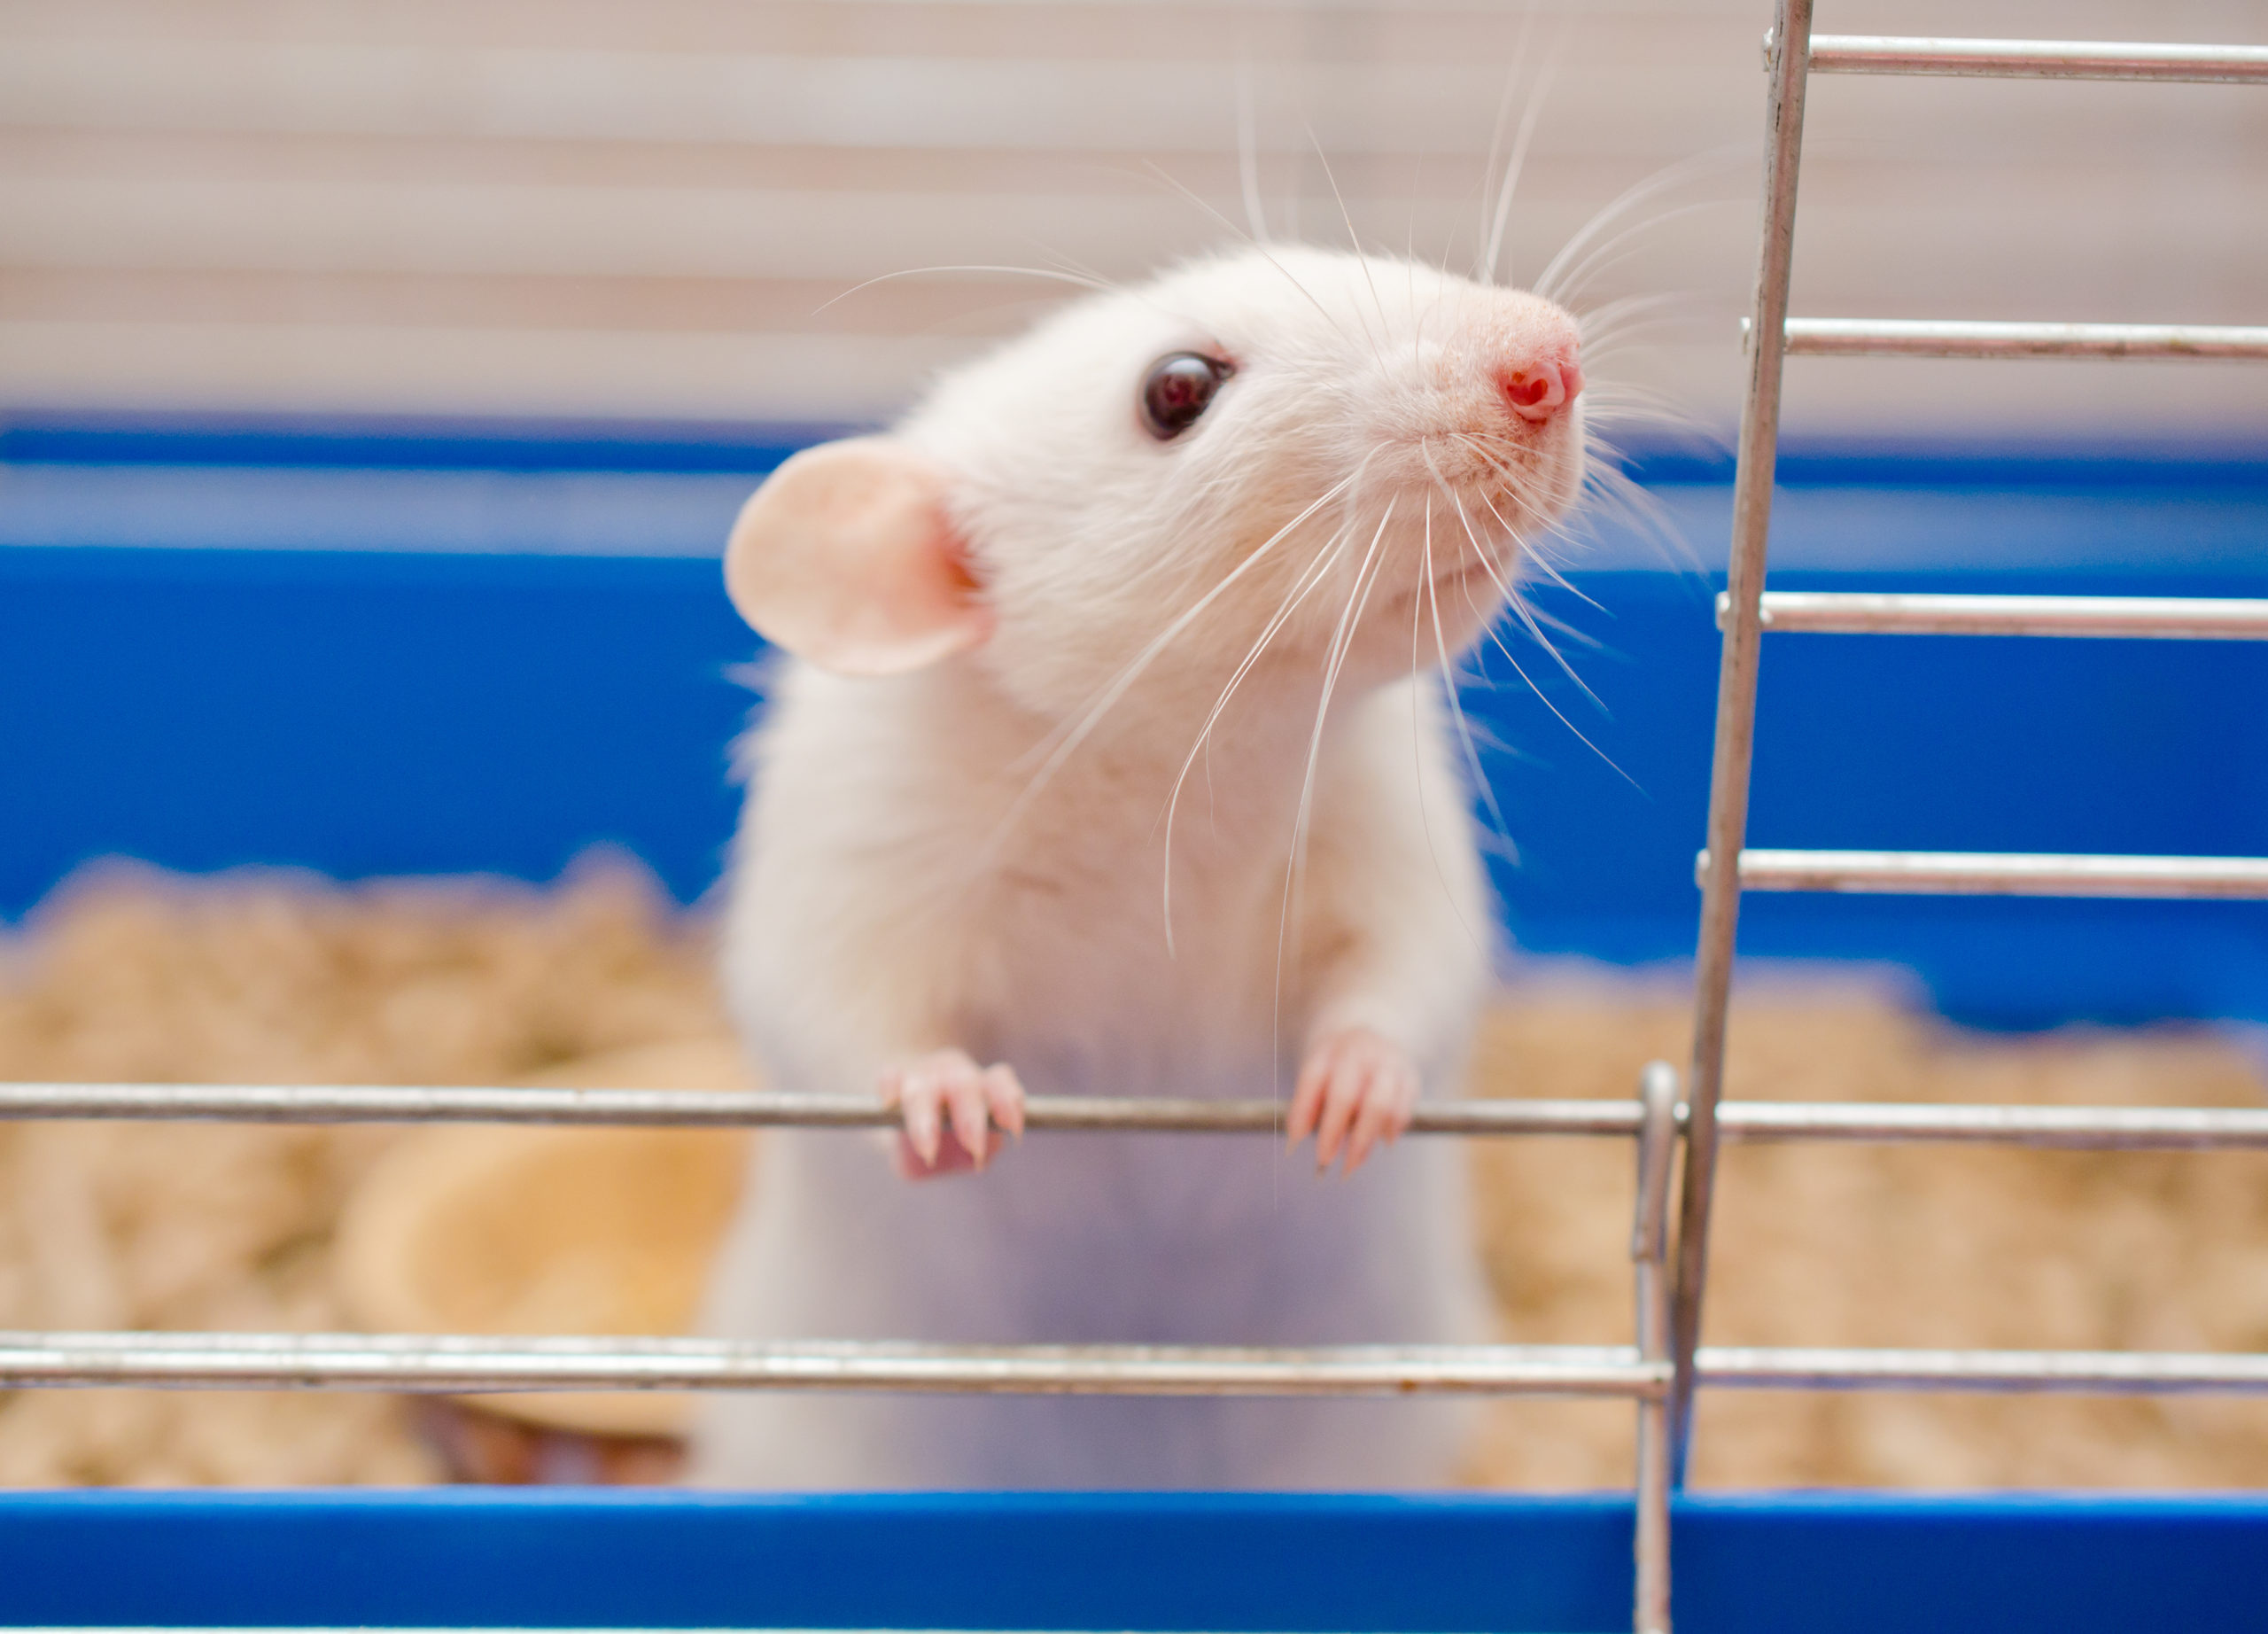 How Can I Tell if My Mouse is Sick? How Can I Help? | Small Pet Select